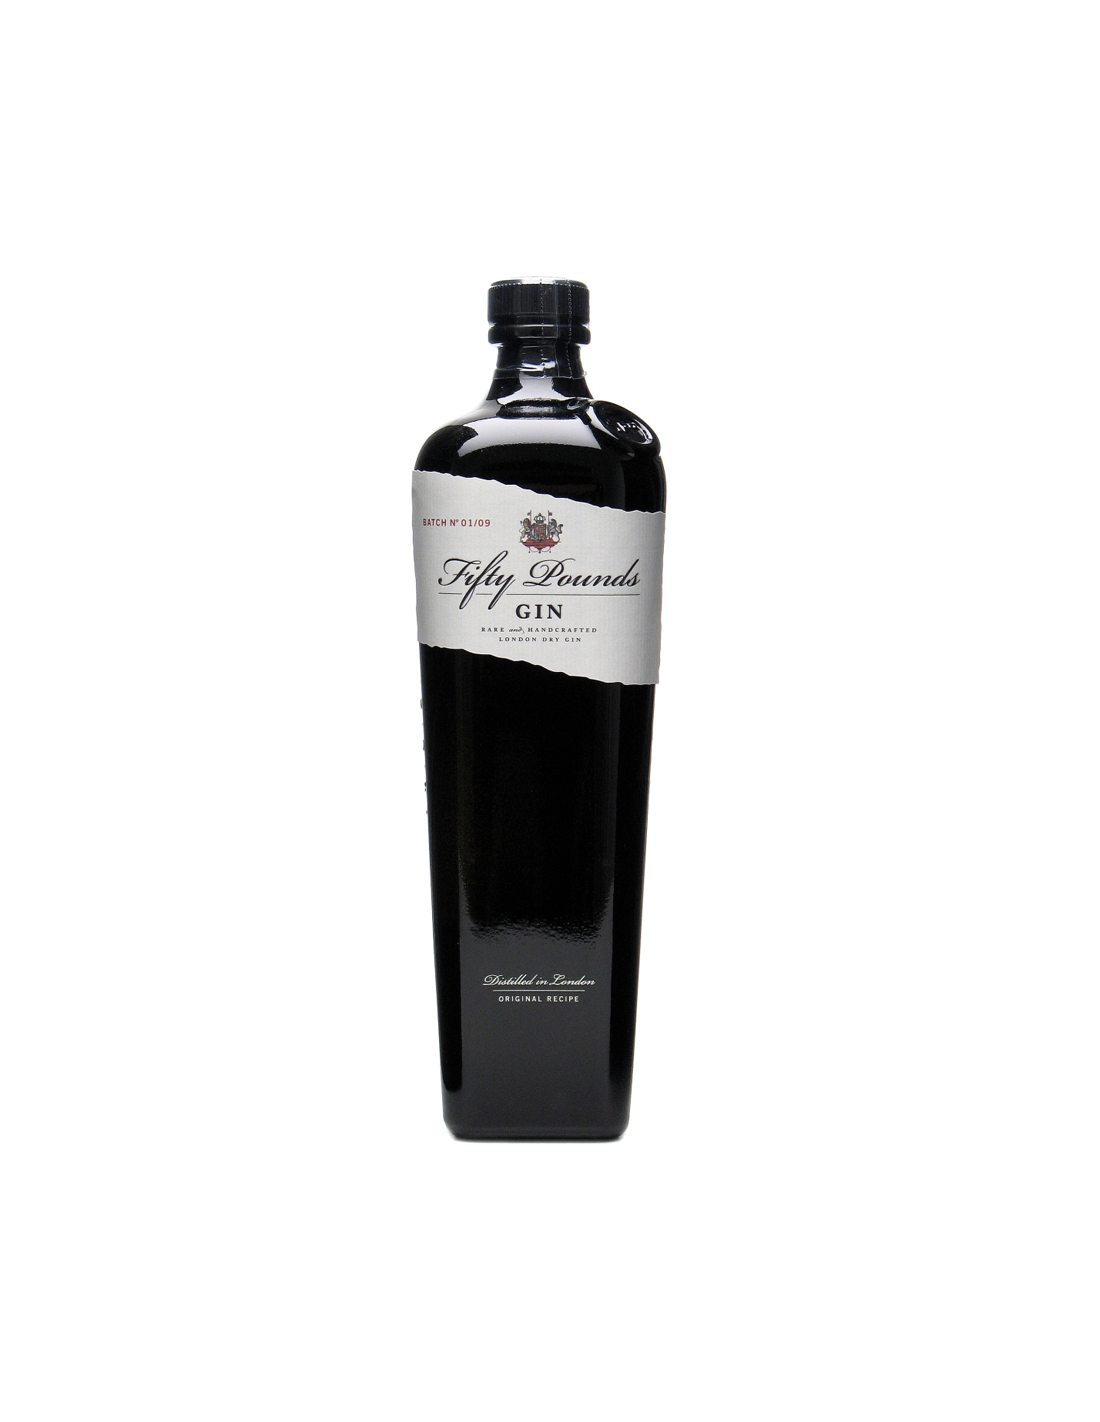 Gin Fifty Pounds 43.5% alc., 0.7L